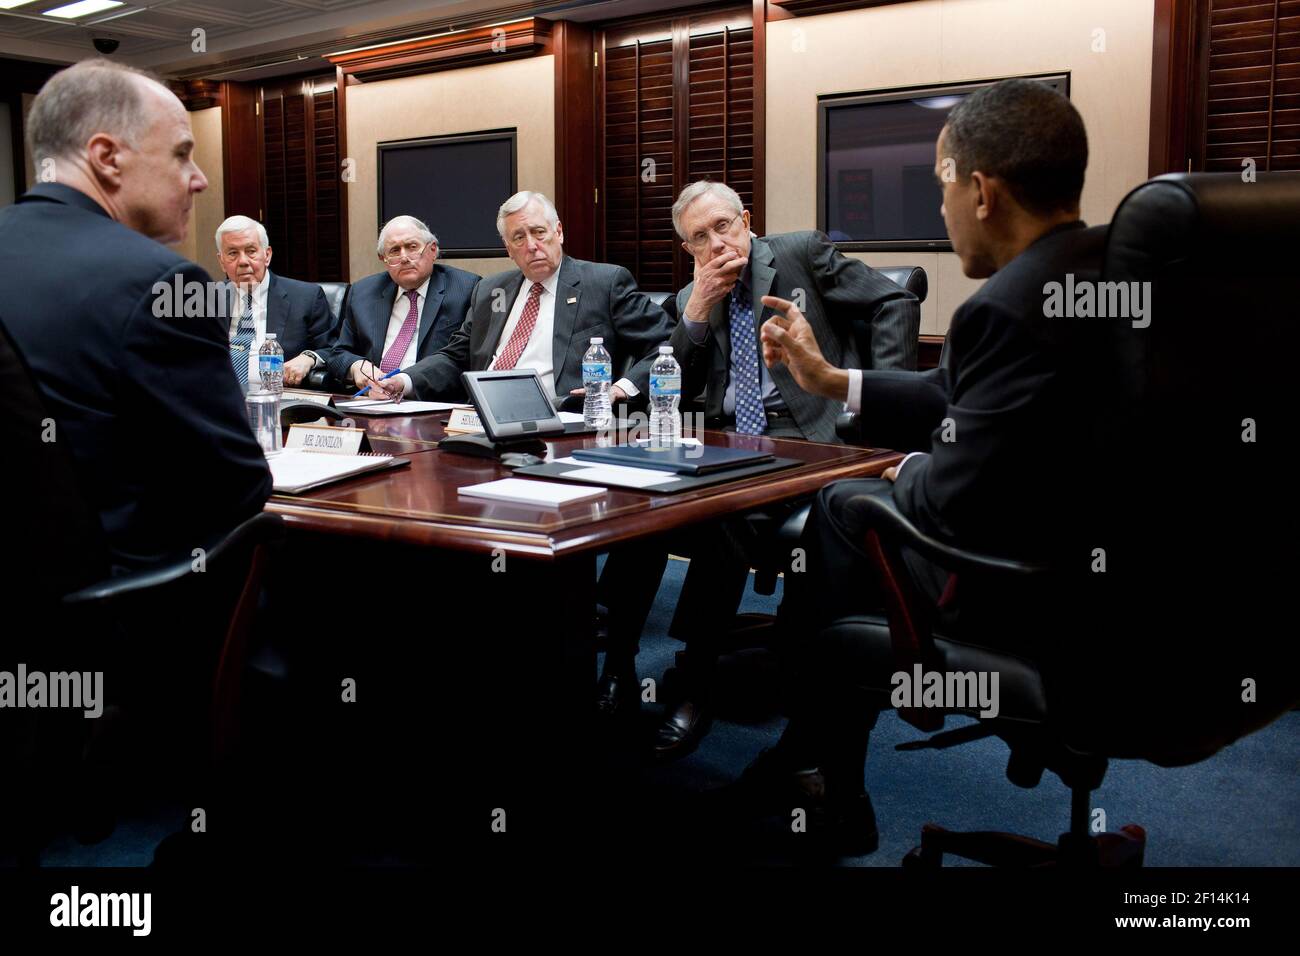 President Barack Obama meets with a bipartisan group of Congressional leaders on Libya in the Situation Room of the White House March 18 2011. Seated from left are: National Security Advisor Tom Donilon Sen. Richard Lugar R-Ind. Sen. Carl Levin D-Mich. Rep. Steny Hoyer D-Md. and Senate Majority Leader Harry Reid D-Nev. Stock Photo